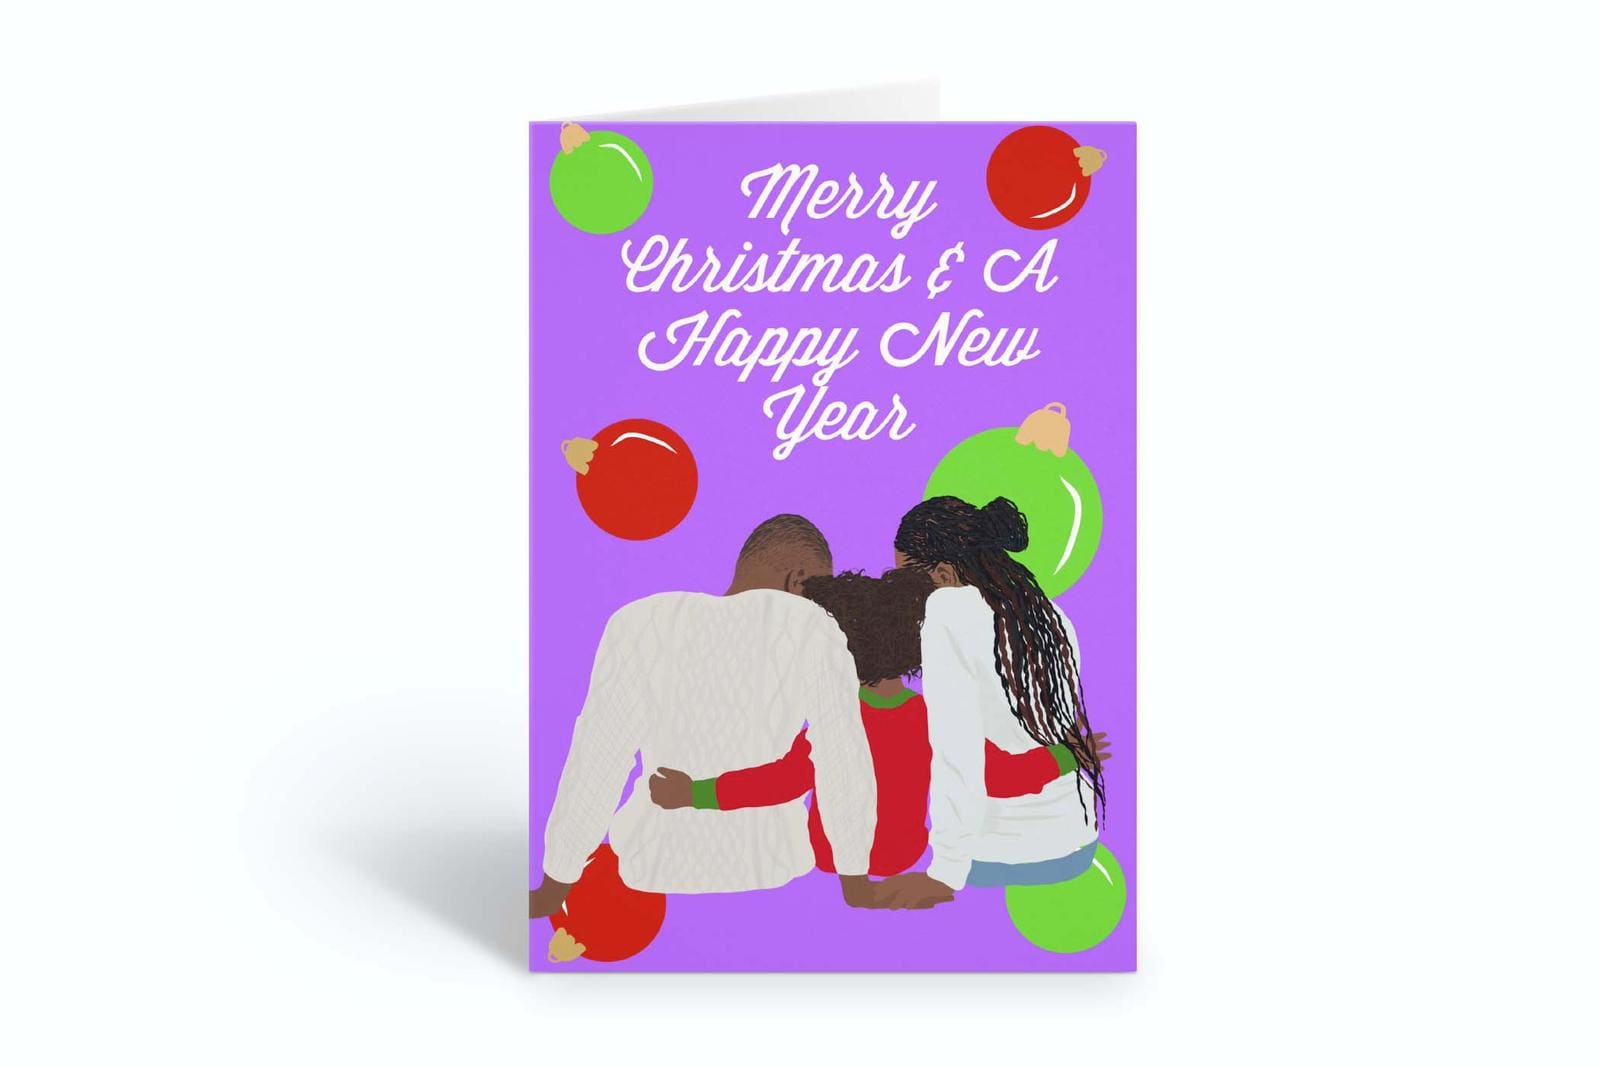 Merry Christmas and a Happy New Year Card